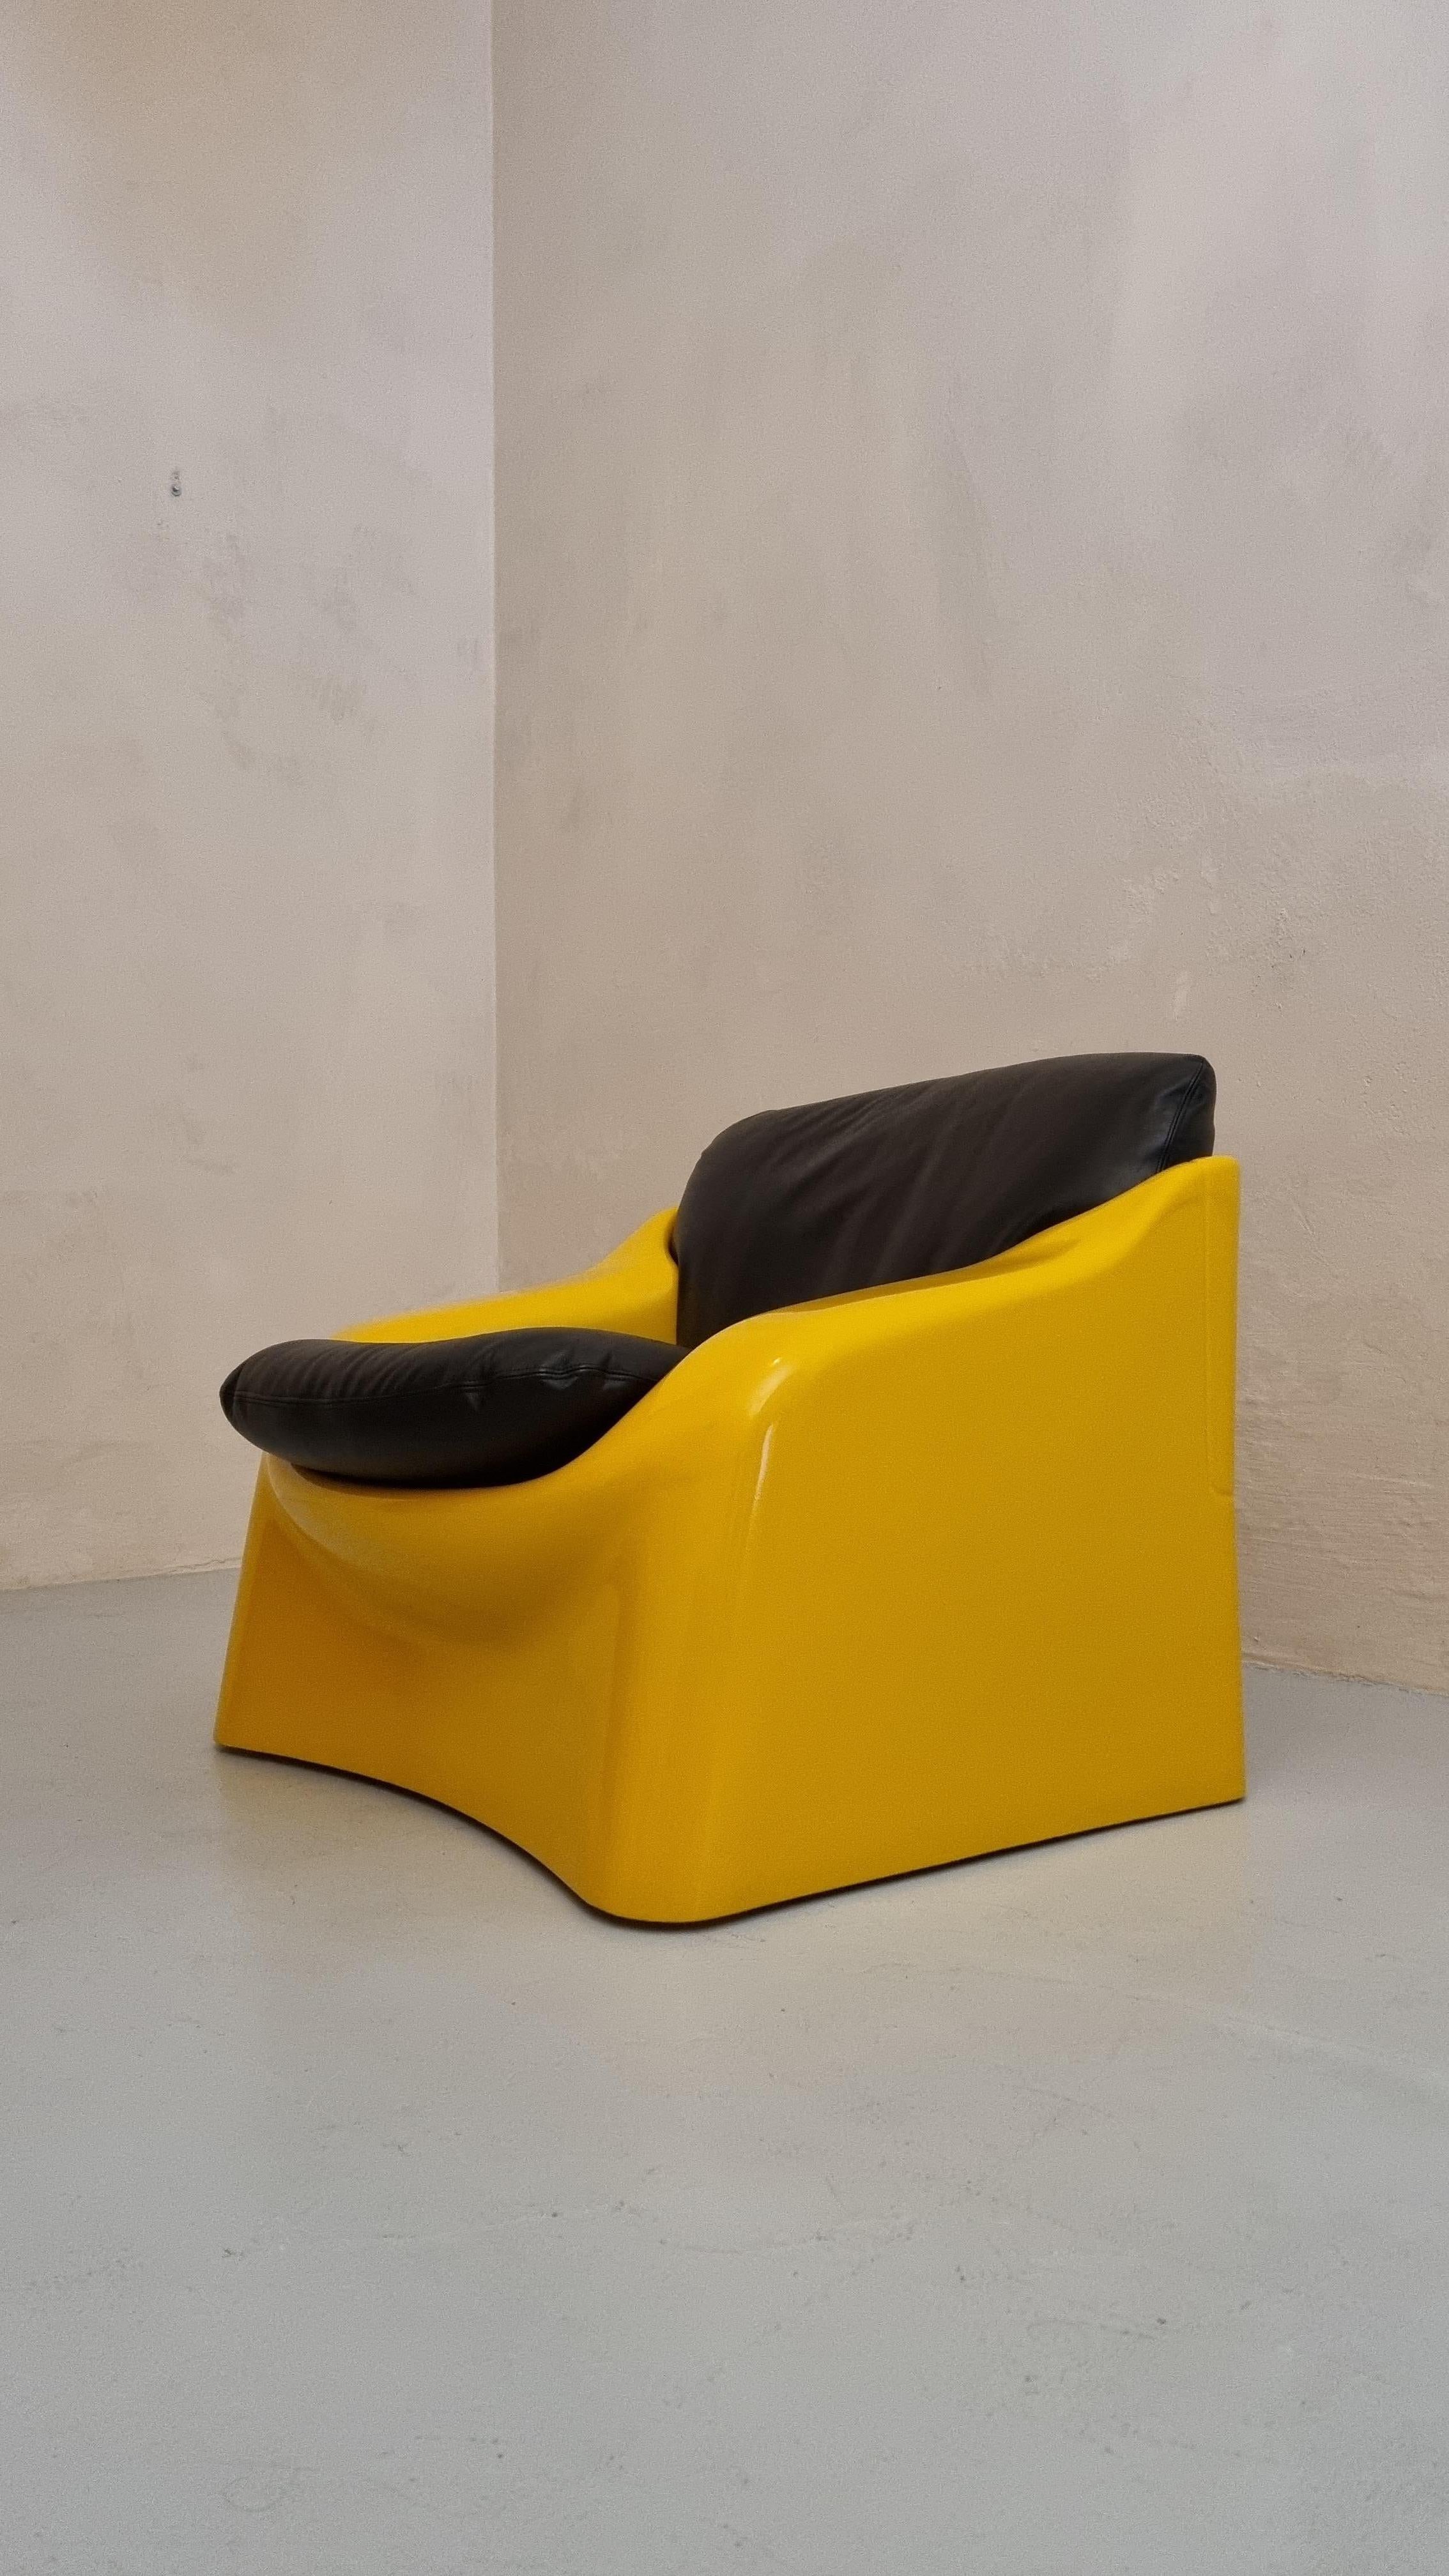 Galassia armchair designed by Ferdinando Buzzi for Ferruccio Brunati , 70s.
Structure in shockproof polystyrene and plastic coating, seat in cowhide leather.
A valid testimony of the first trials, shockproof plastic in the field of furniture, this